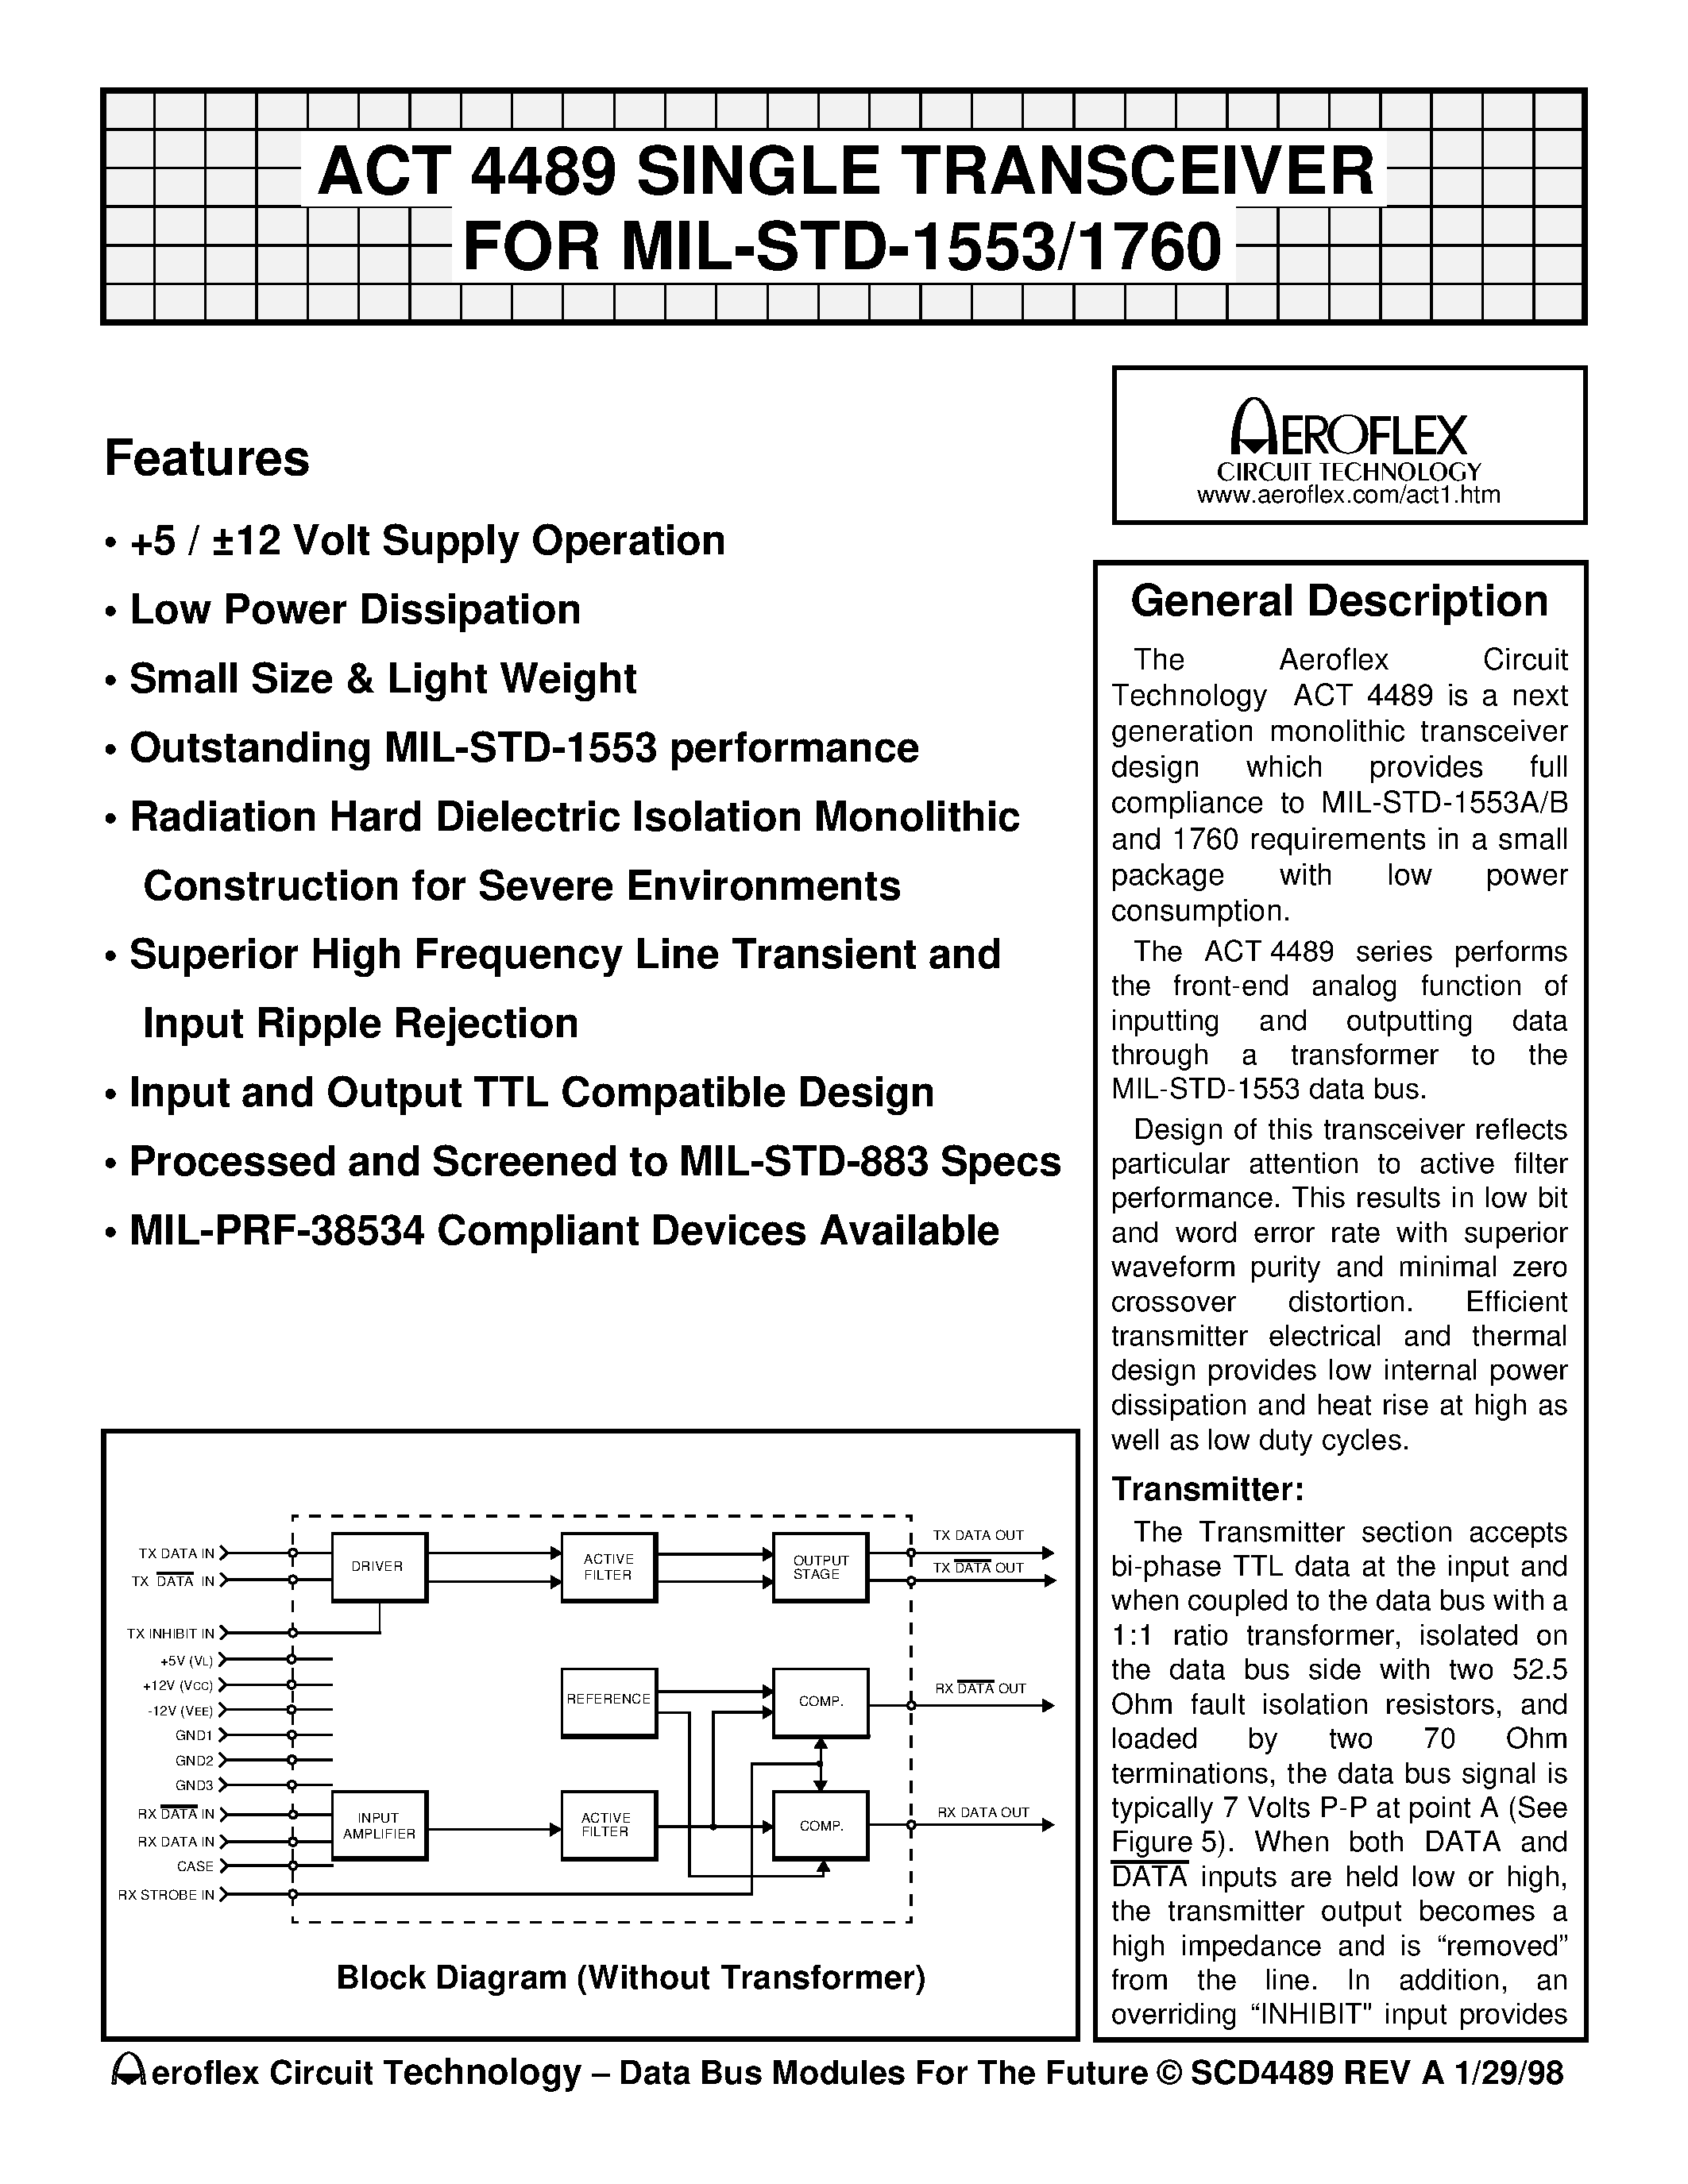 Datasheet ACT4489-I - ACT 4489 SINGLE TRANSCEIVER FOR MIL-STD-1553/1760 page 1